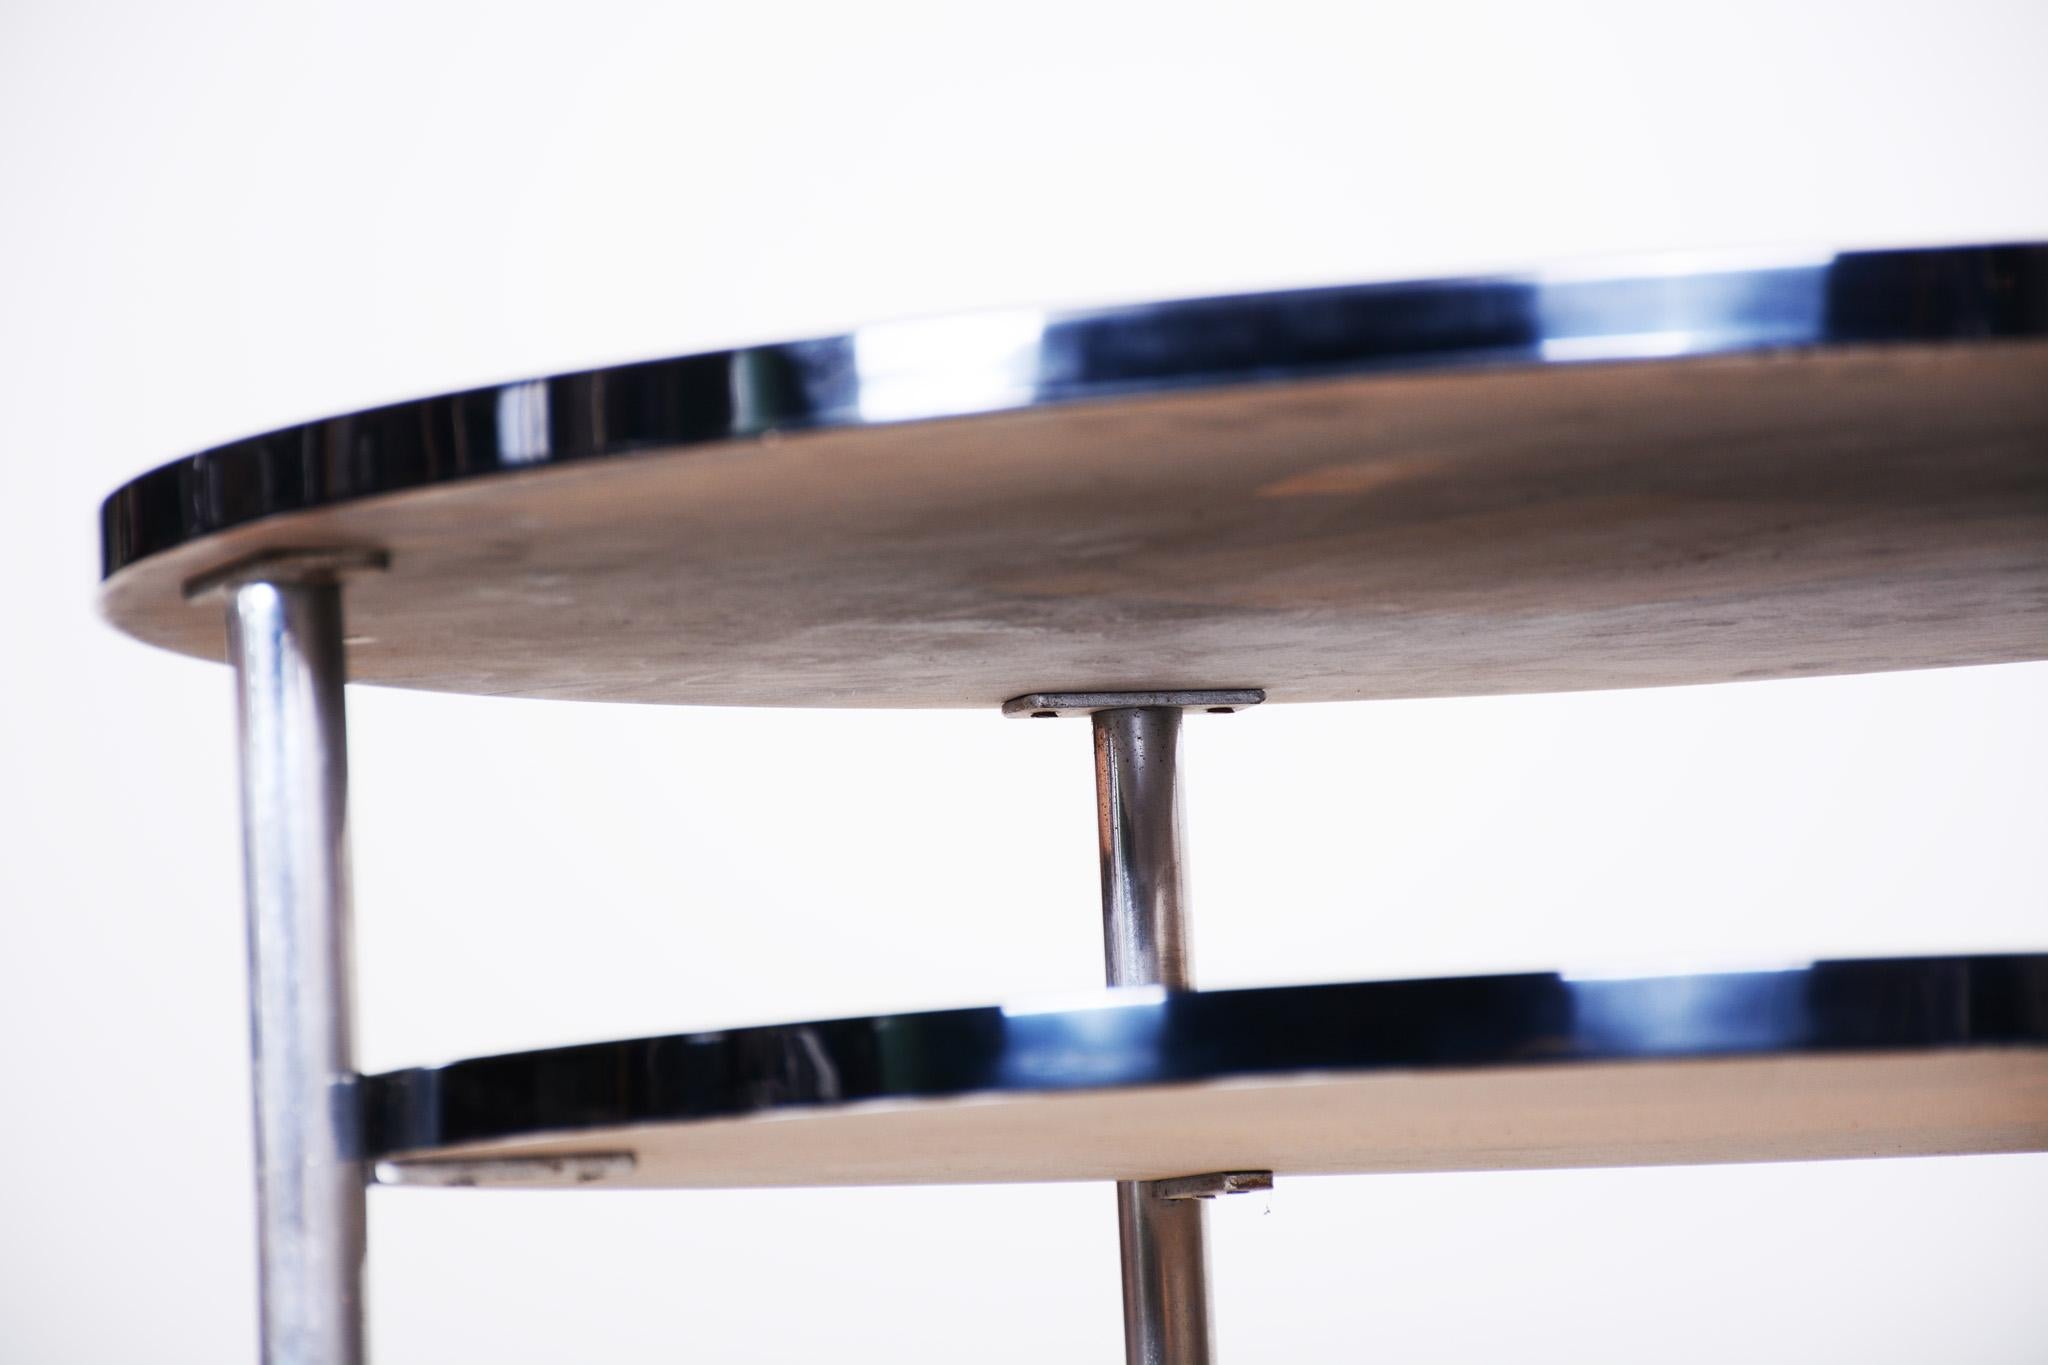 Mid-20th Century Halabala Designed Fully Restored Bauhaus Table Made in the 1920s in Czechia For Sale